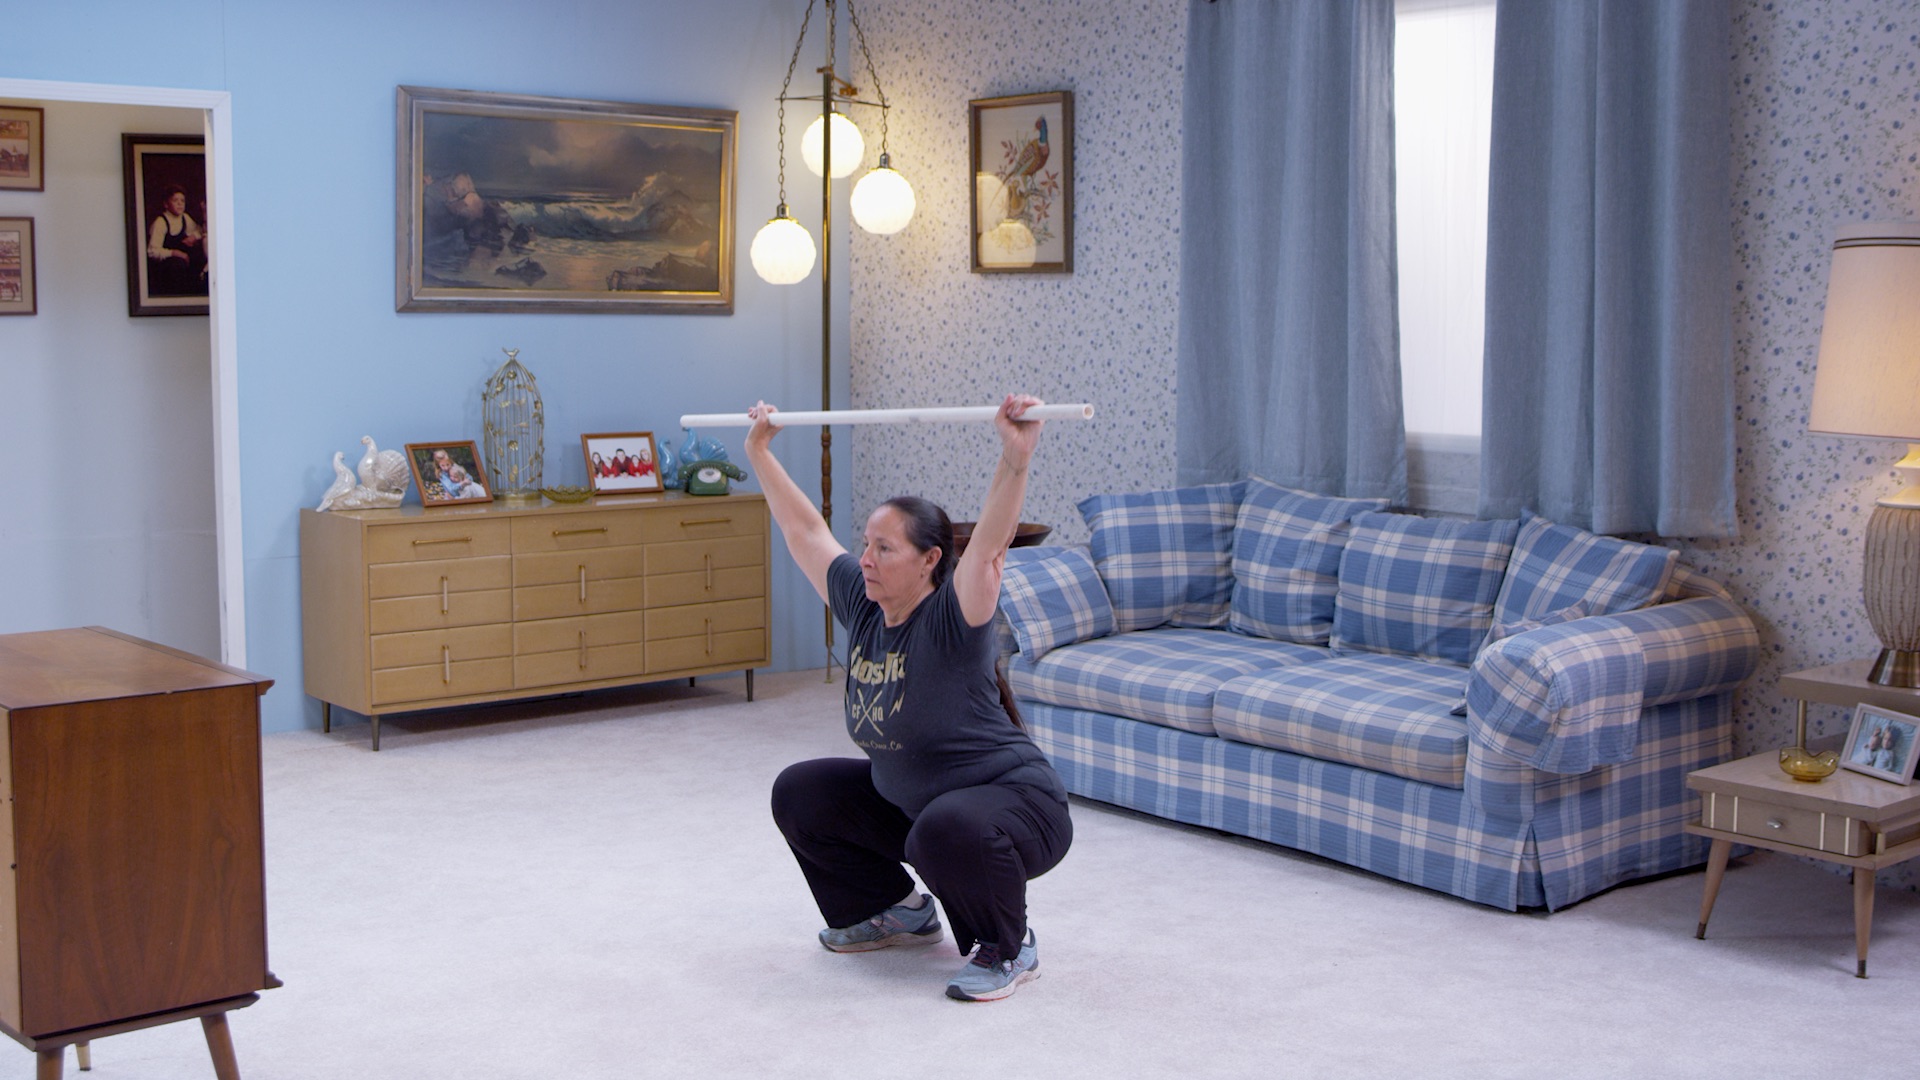 CrossFit | At-Home Workout: Jumping Jacks & Overhead Squats